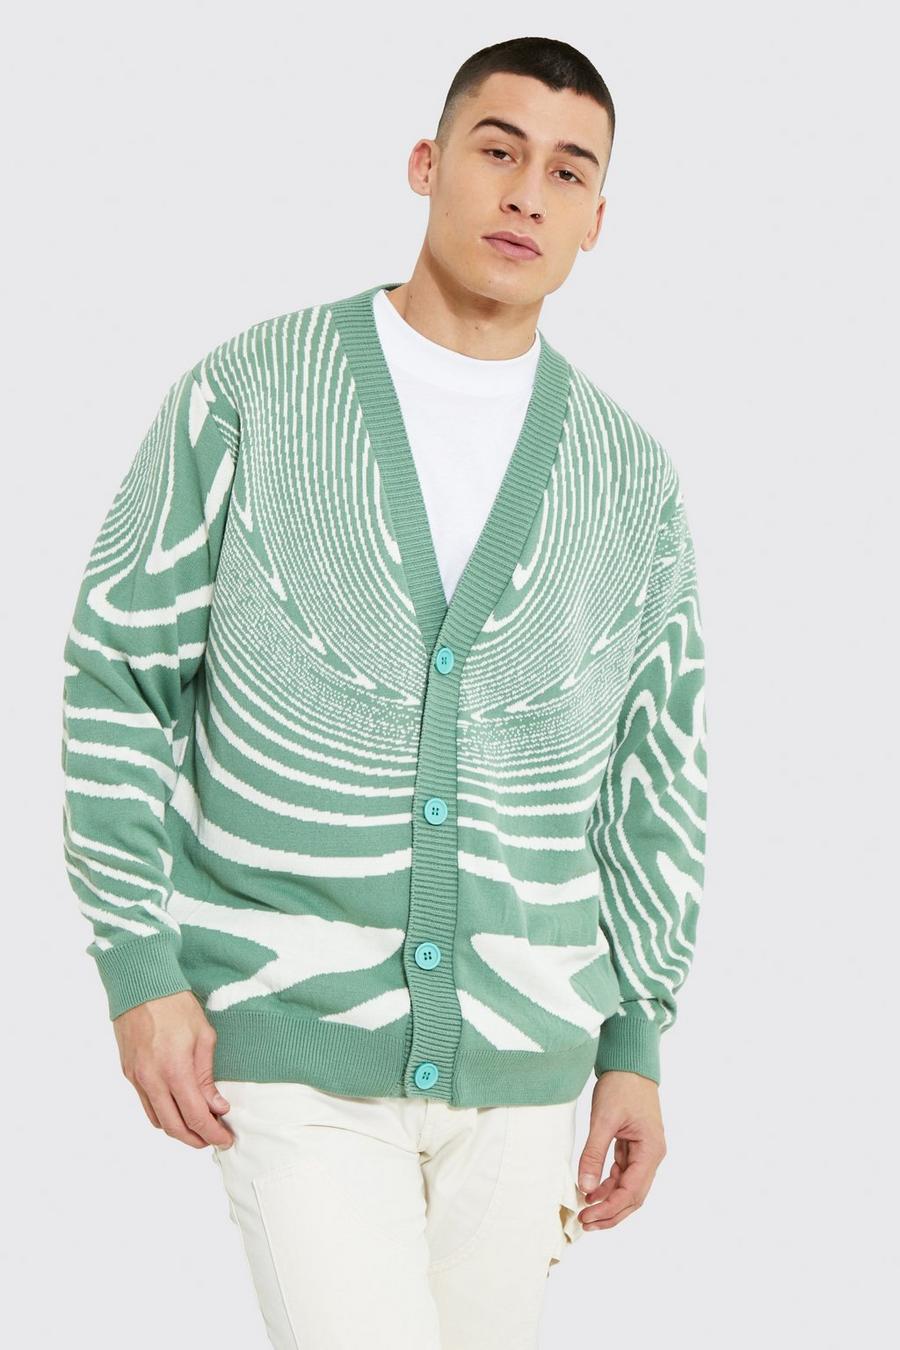 Sage green Oversized Knit Psychedelic Pattern Cardigan